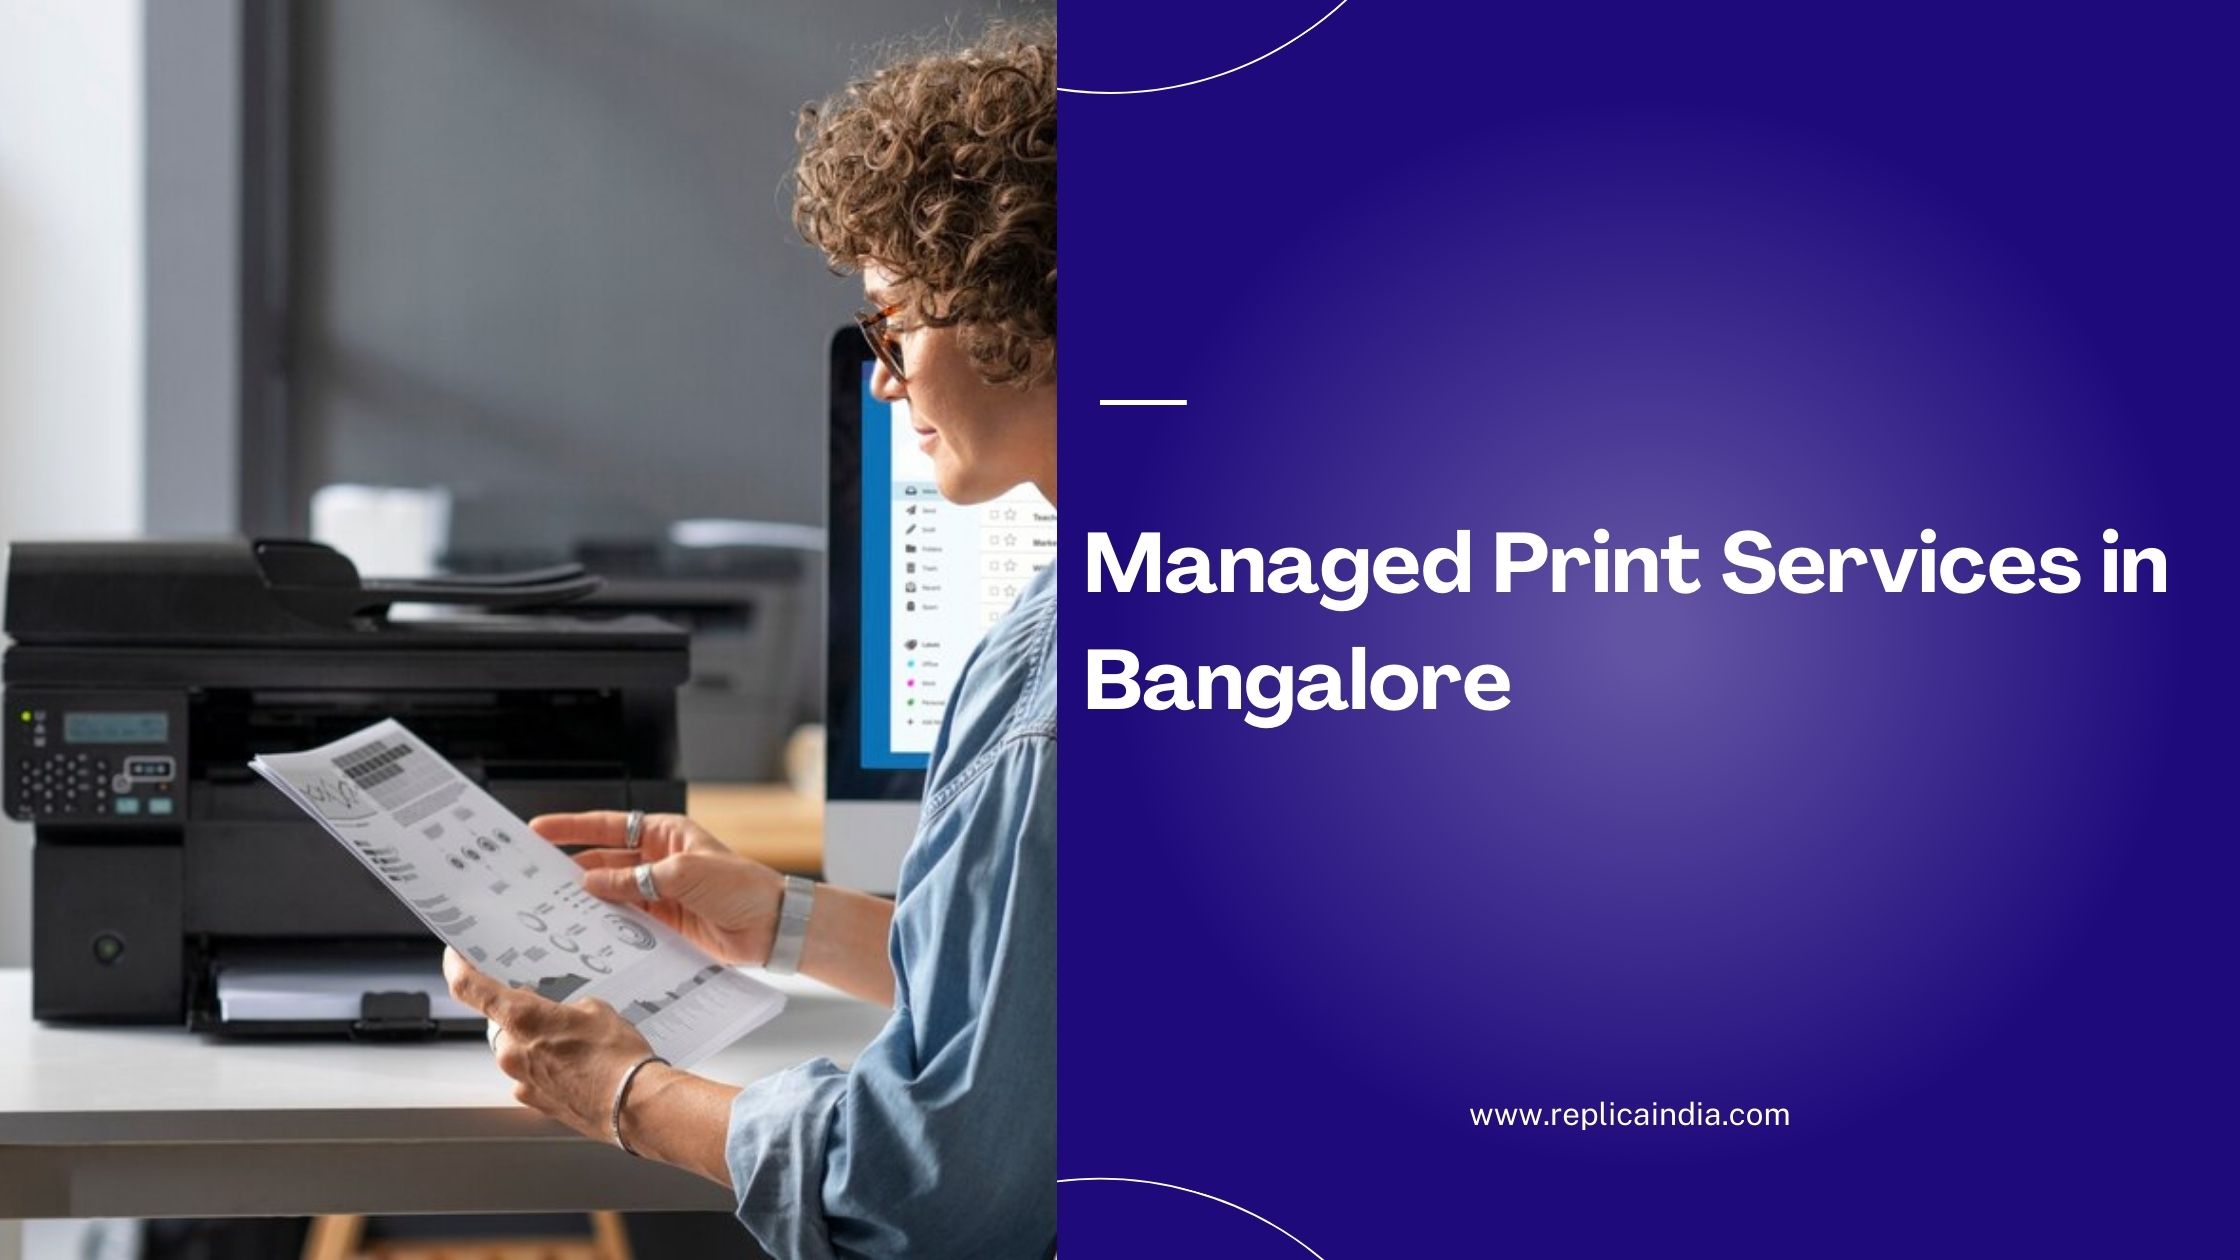 Managed Print Services in Bangalore